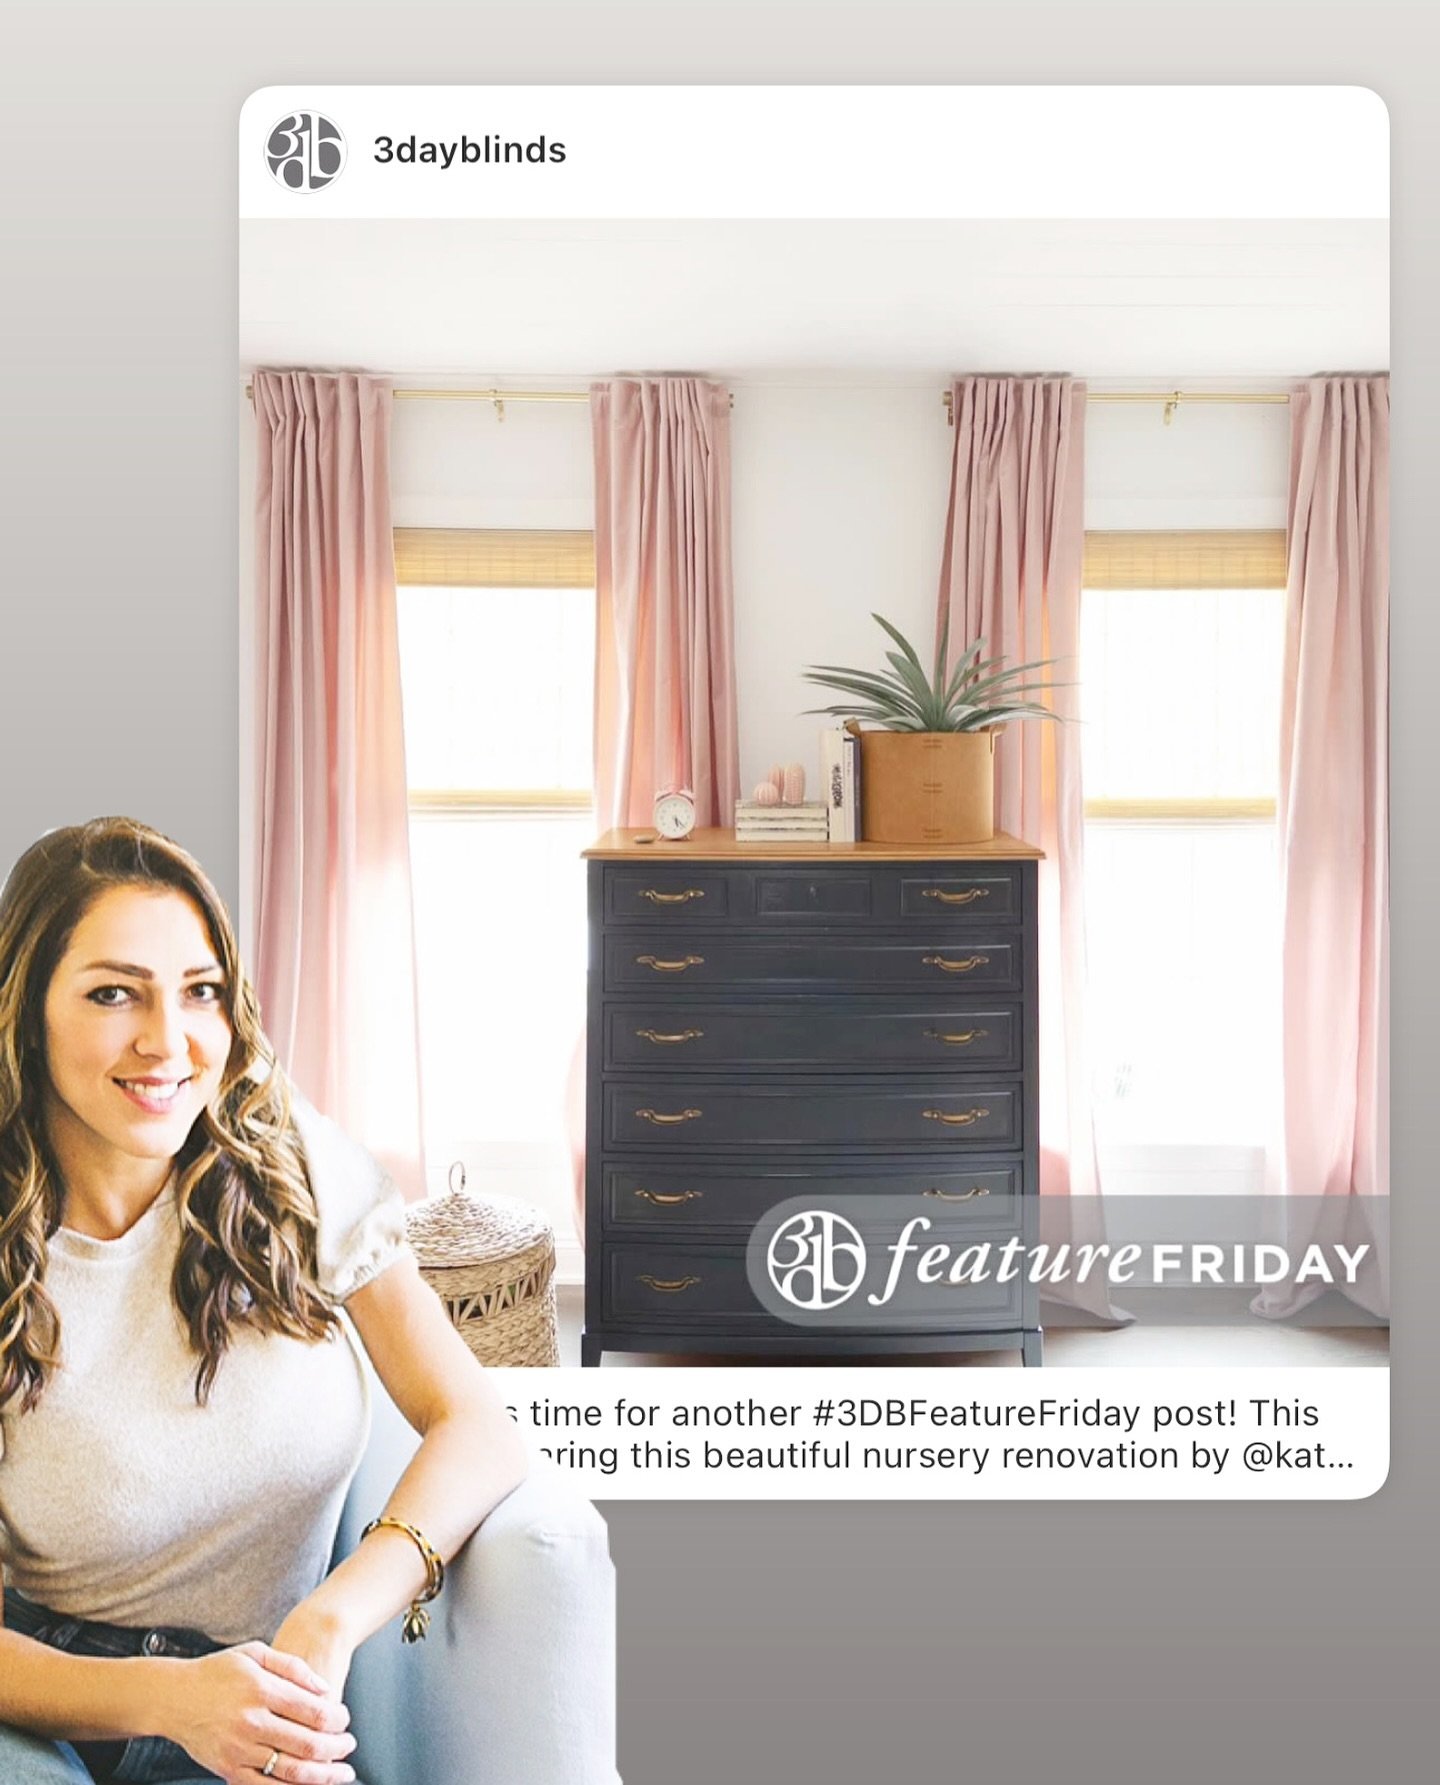 What a sweet surprise to see this generous Friday feature from @3dayblinds today ✨🫶🏼💞 Thank you kindly for providing g such great products, service and this too! I do love the products and who doesn&rsquo;t love a quick turnaround too?!? Happy wee